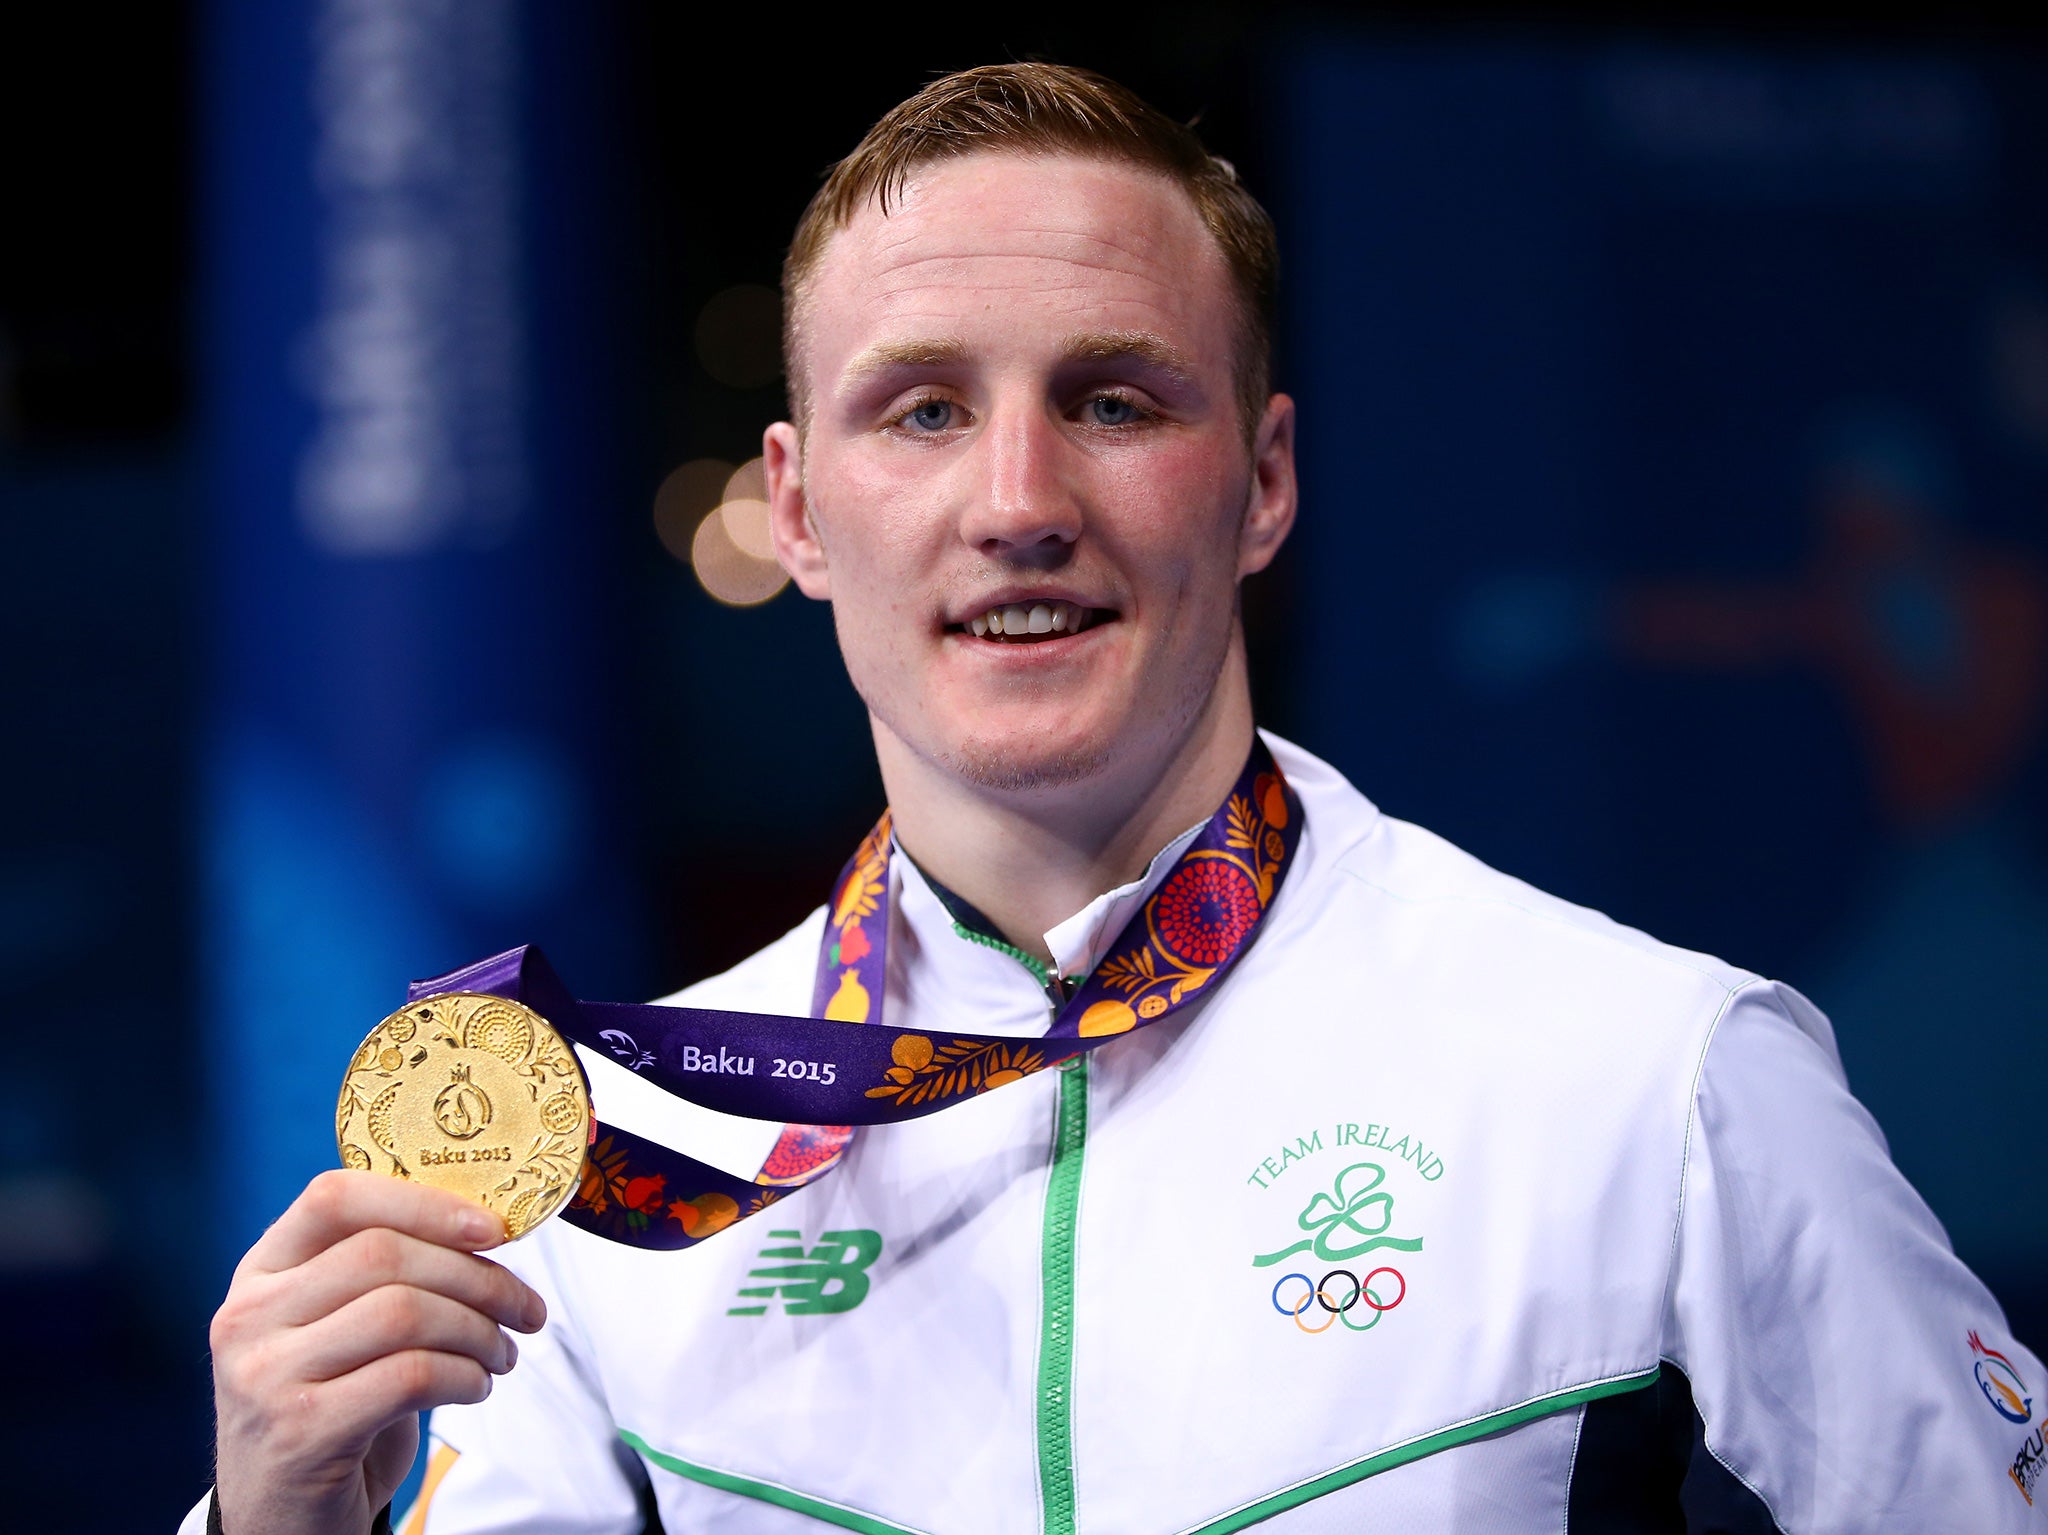 O'Reilly won gold at the European Games in 2015